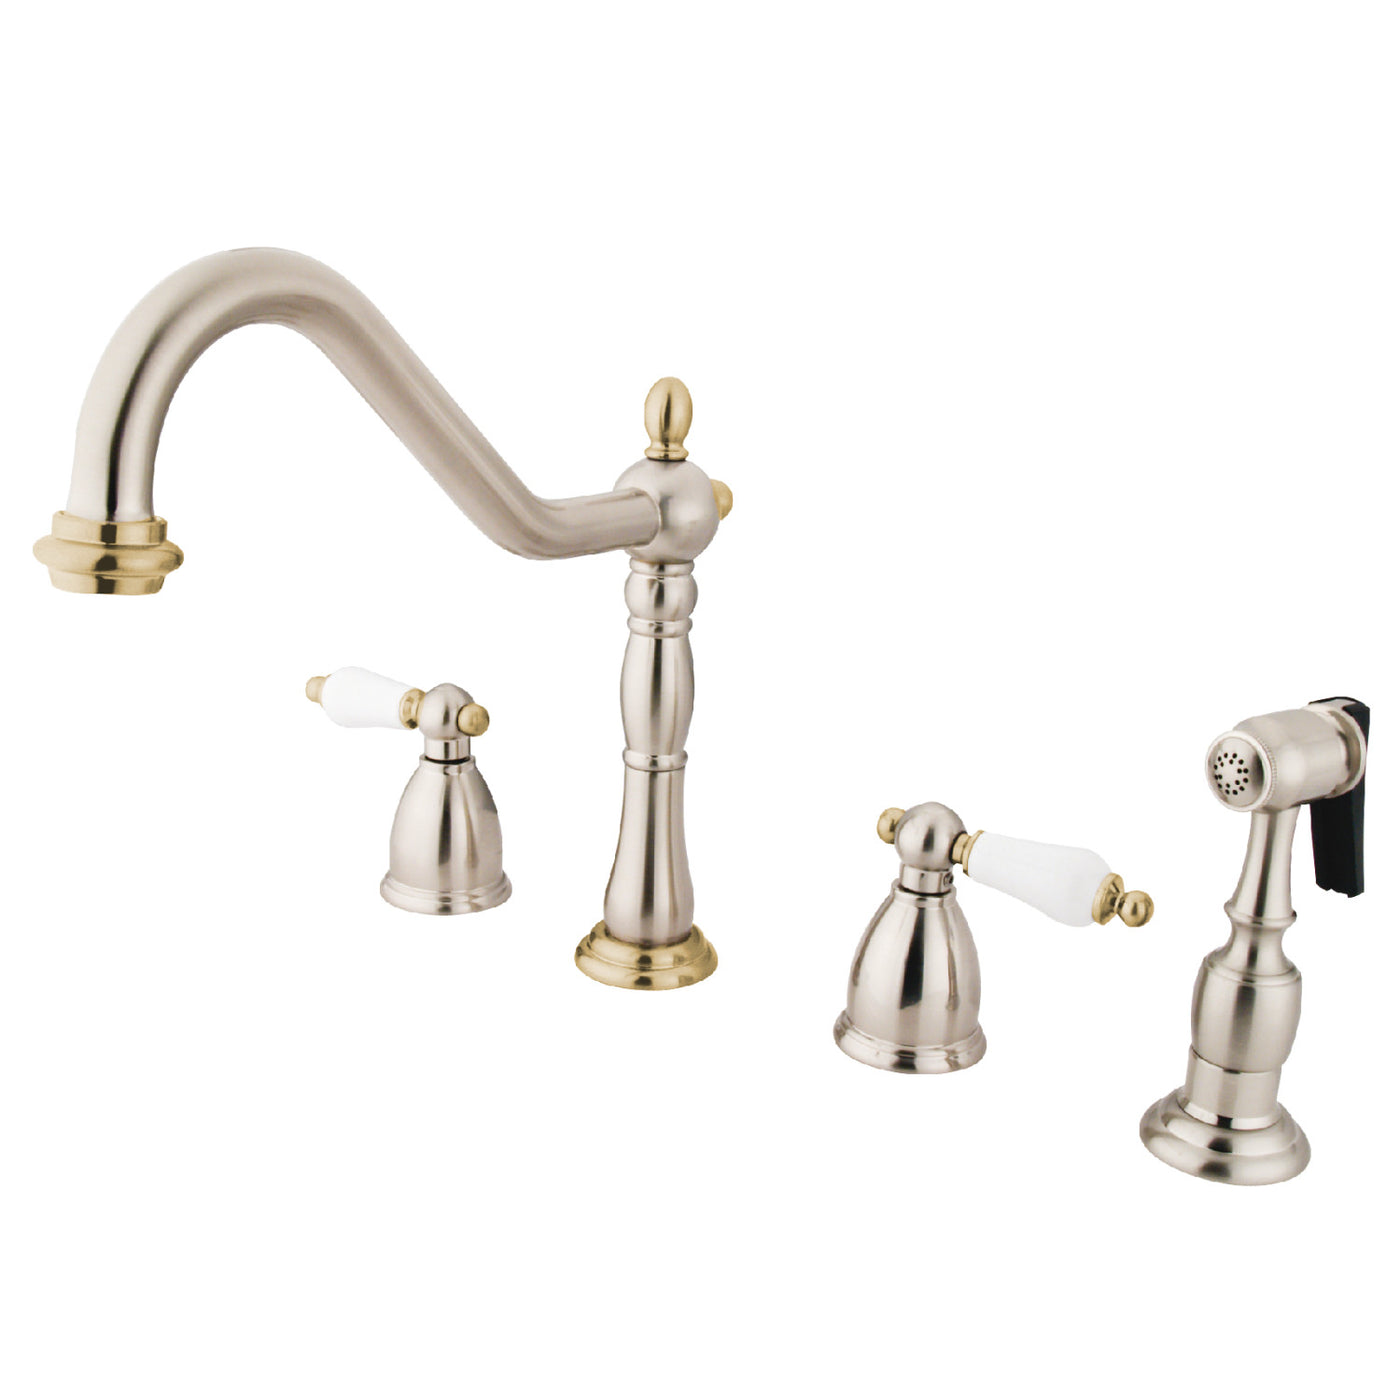 Elements of Design EB1799PLBS Widespread Kitchen Faucet with Brass Sprayer, Brushed Nickel/Polished Brass